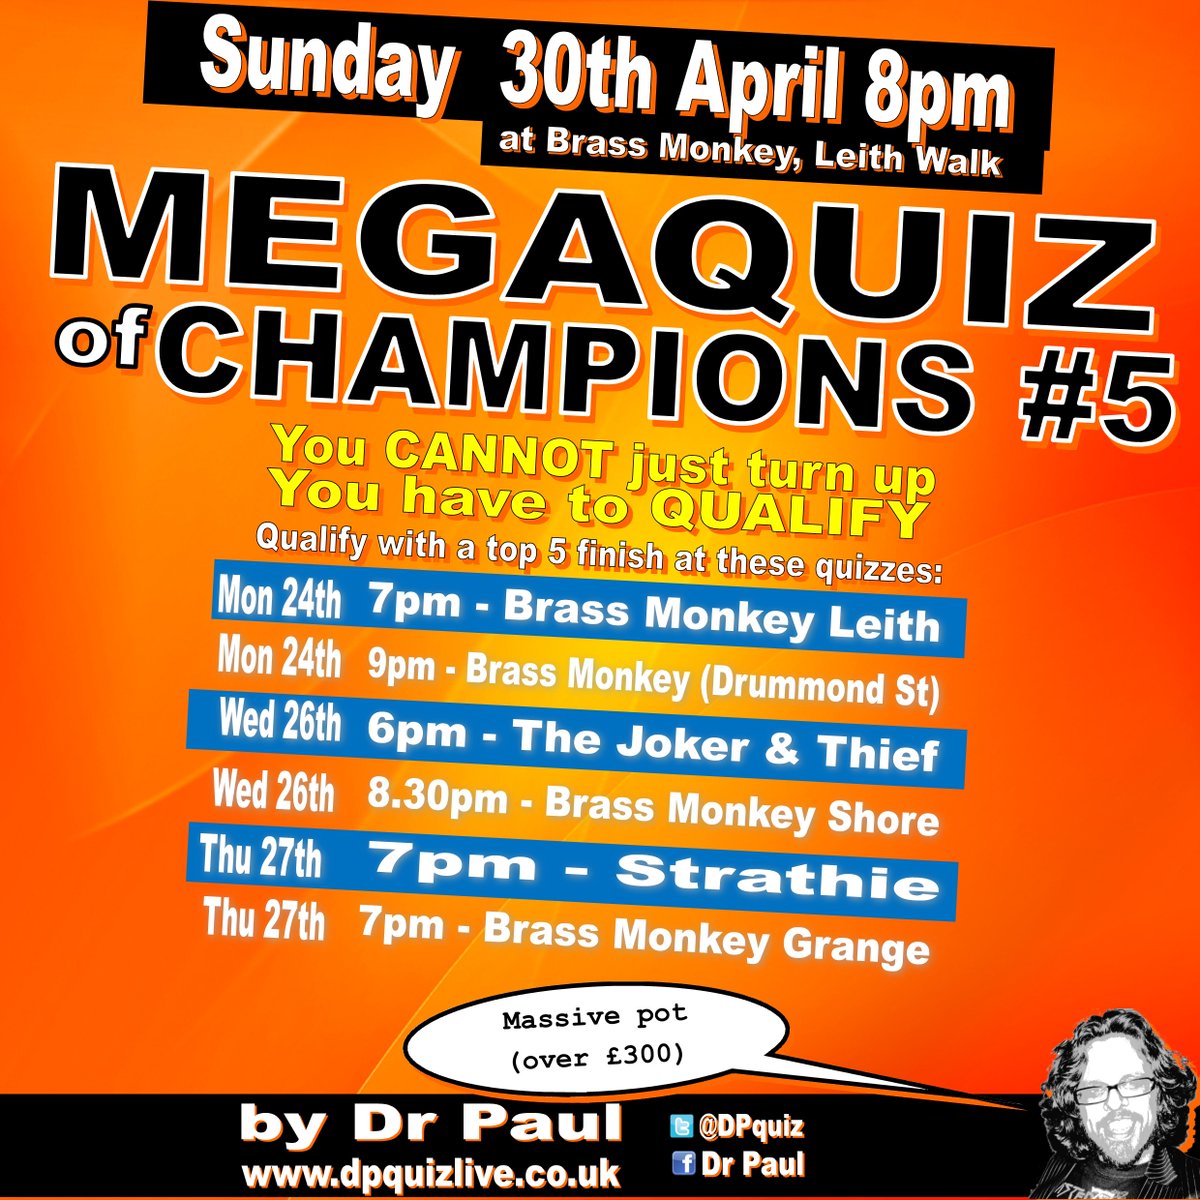 Megaquiz is back!

Qualify by finishing top 5 at any of these:

Mon 24th 
7pm - Brass Monkey Leith
9pm - Brass Monkey Drummond St

Wed 26th
6pm - Joker & Thief
8.30pm - Brass Monkey Shore

Thur 27th
7pm - Brass Monkey Grange
7pm - The Strathie

#pubquiz #dpquiz #edinburgh